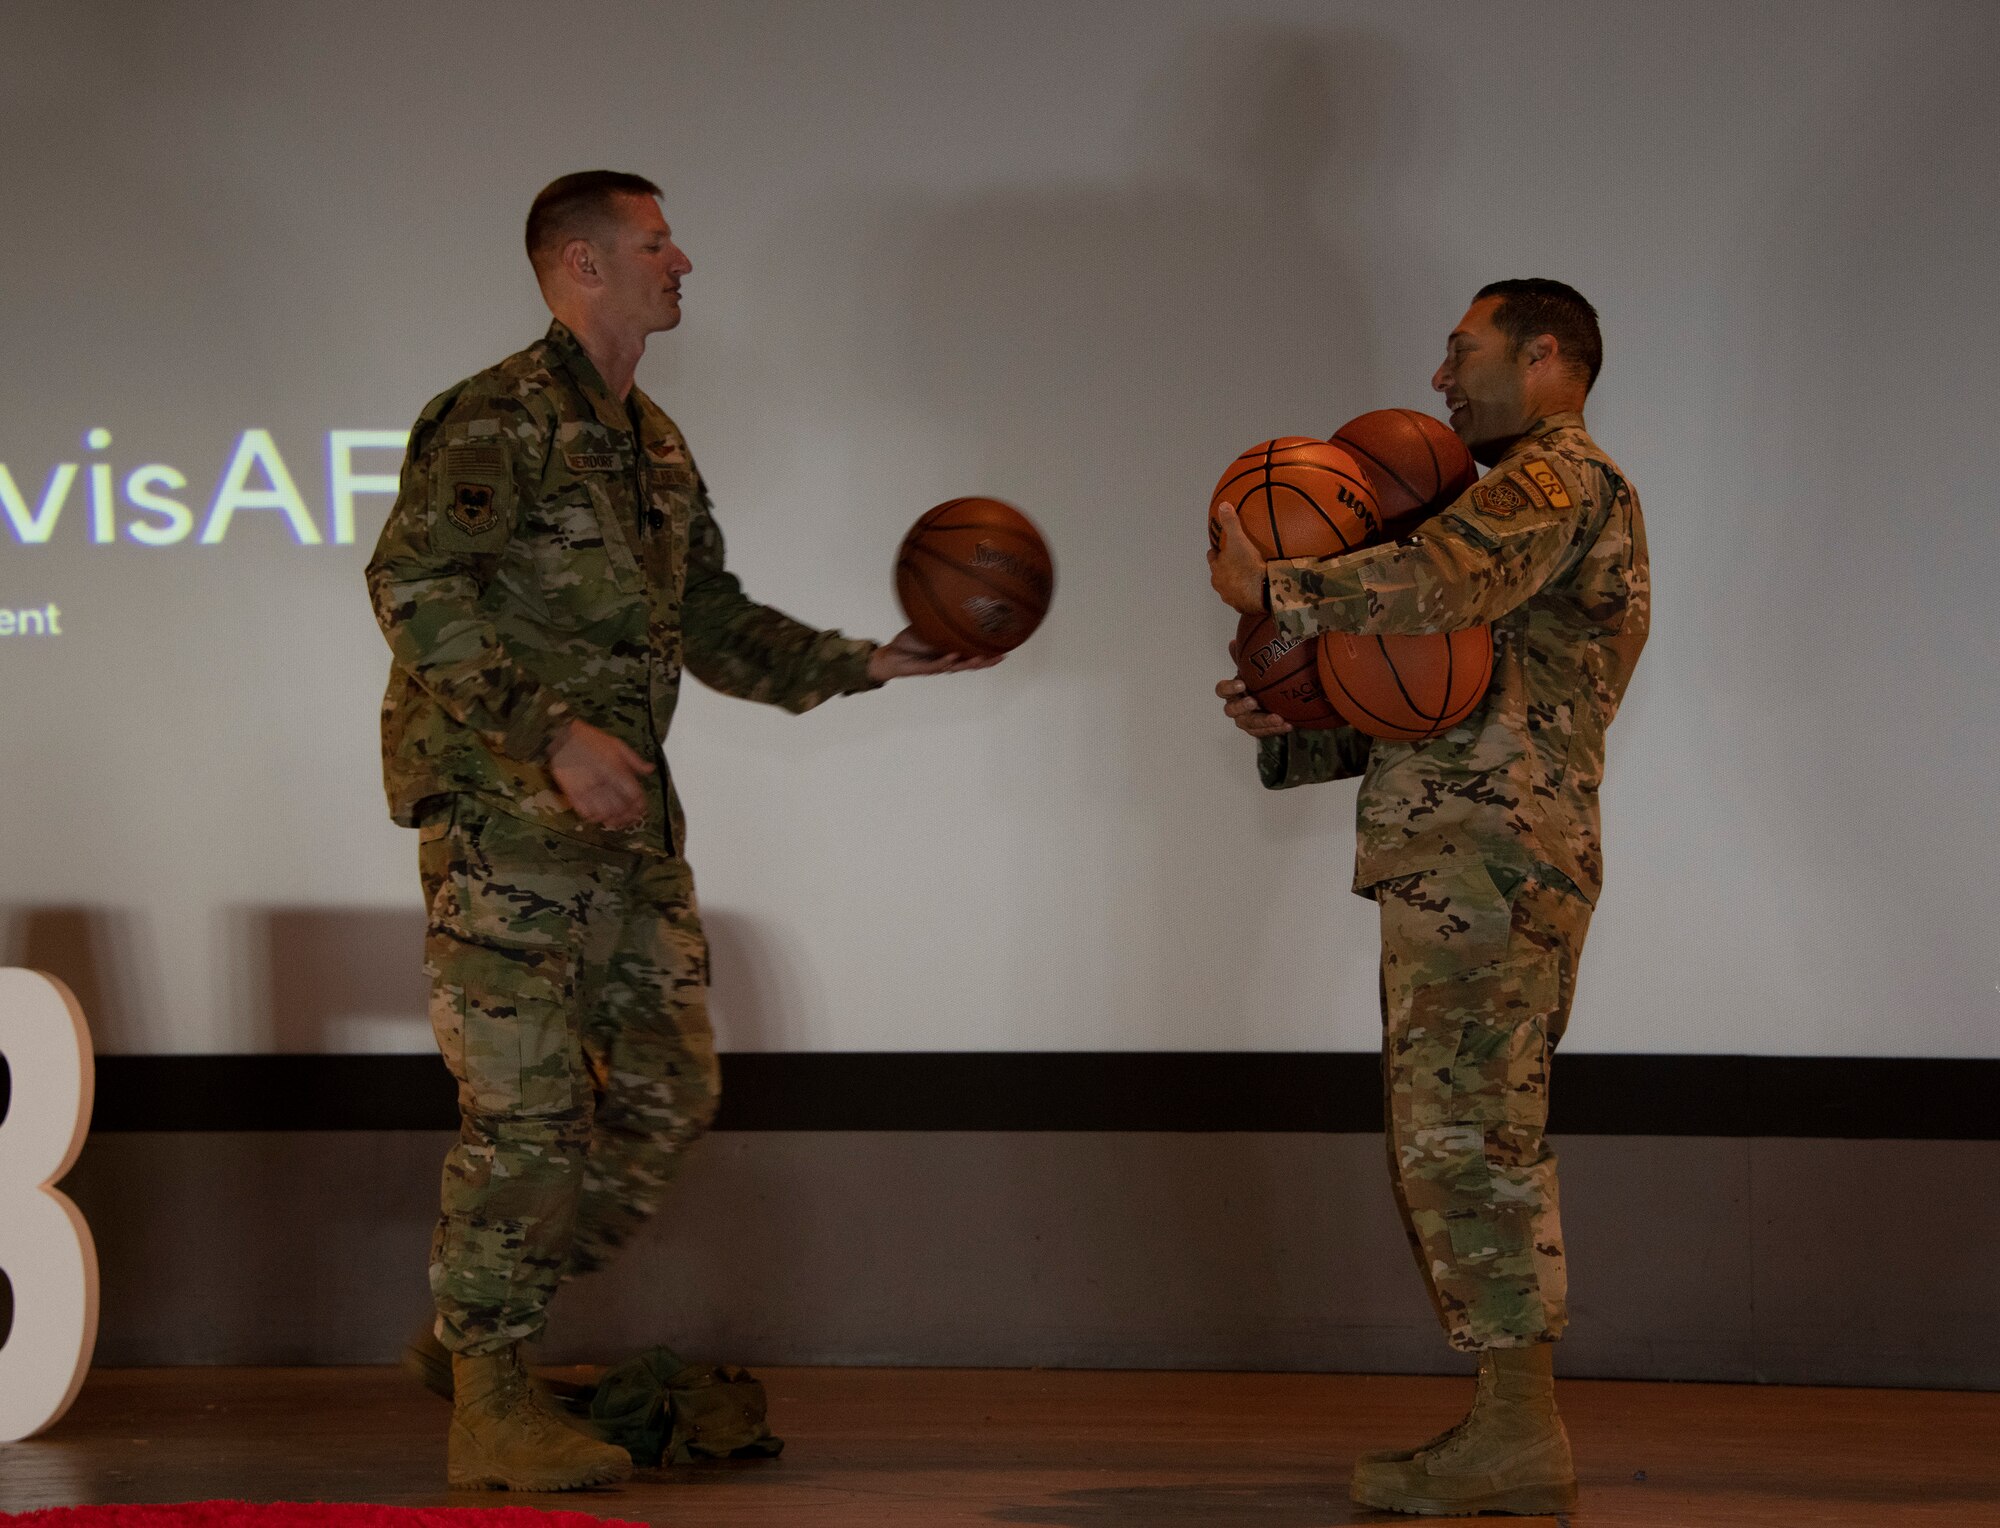 An Airman hands six basketballs to another Airmen and he struggles to carry them all.